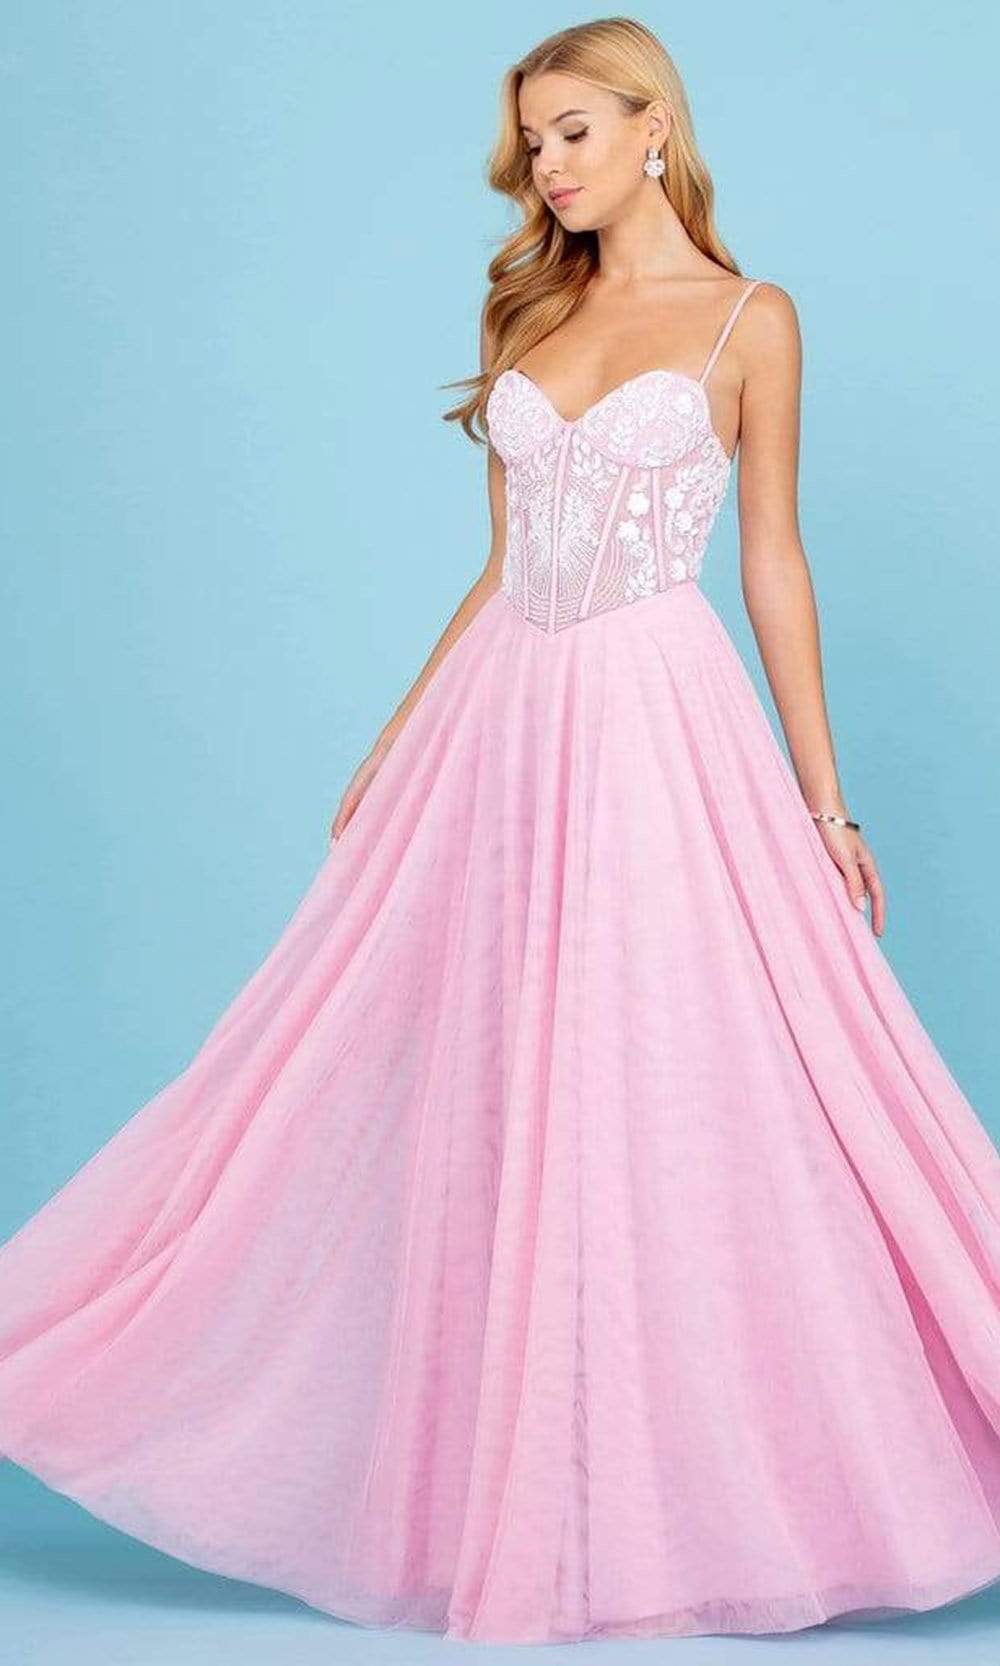 SCALA - 60293 Beaded Sweetheart A-Line Gown
